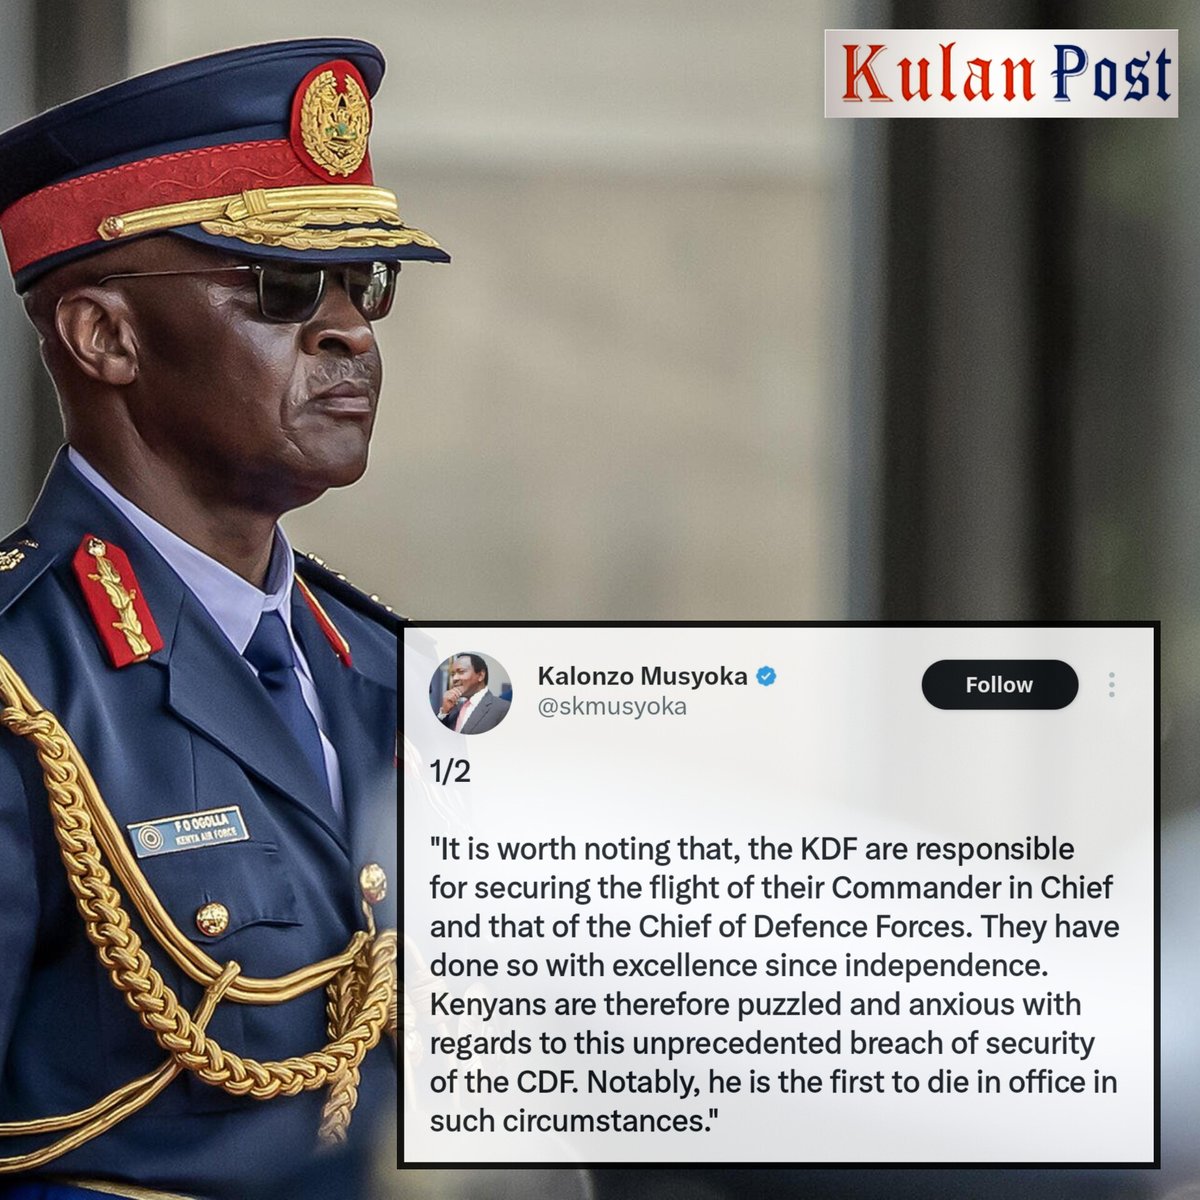 UPDATE: We need answers, says deputy opposition leader Kalonzo Musyoka as the country mourns the passing of General Francis Ogola, the Chief of Kenya Defence Forces who died on Thursday in a chopper crash along other nine other military officers. 'Kenyans are therefore puzzled